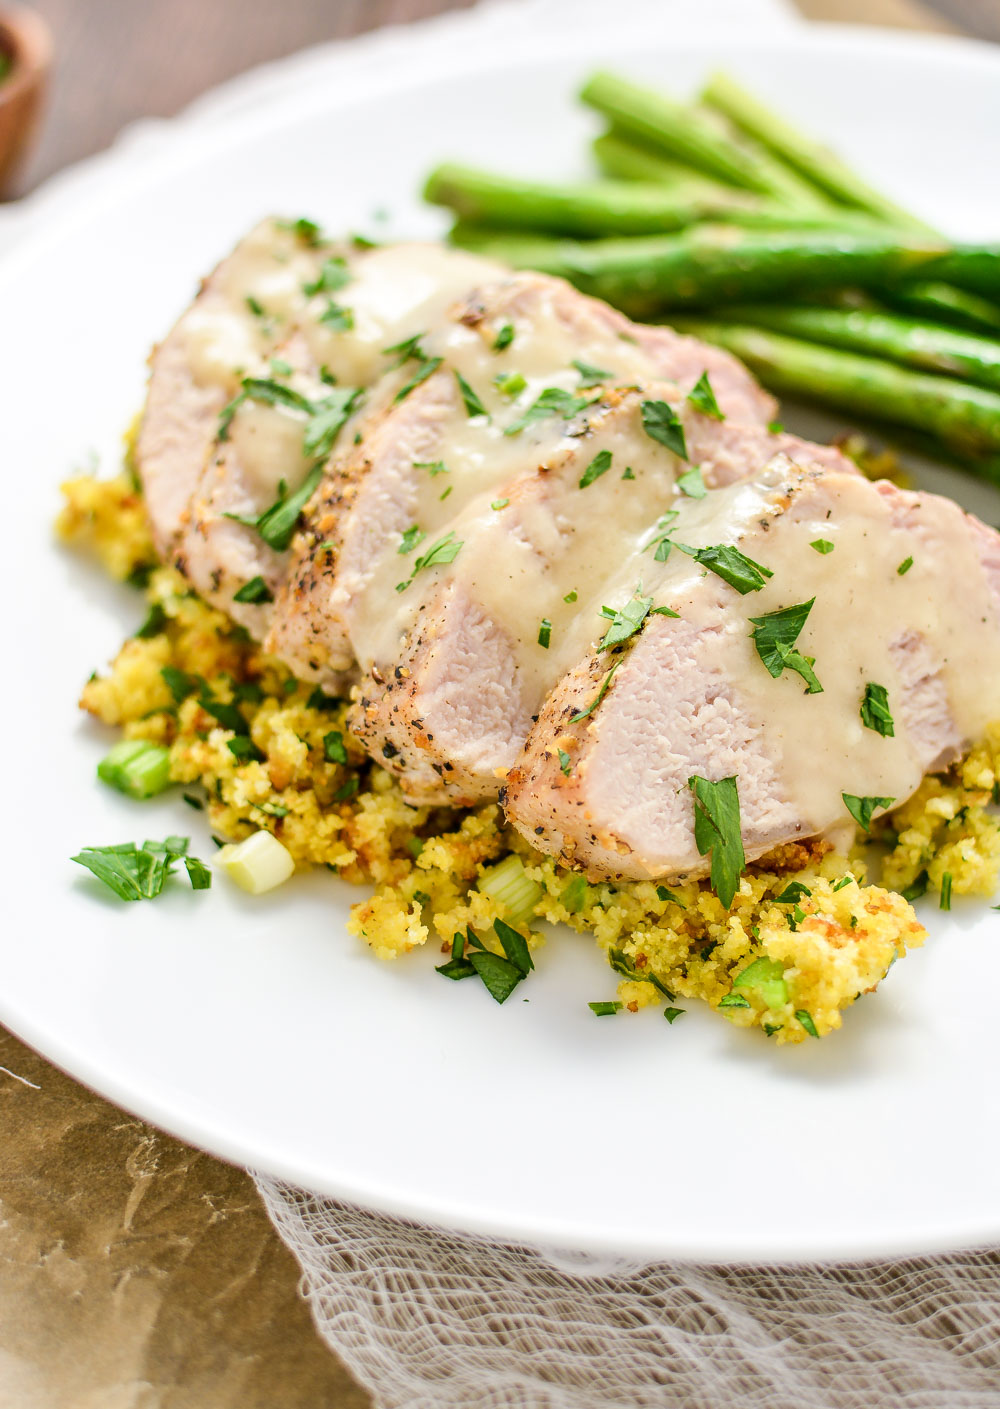 Roasted Lemon Pepper Pork Tenderloin with Cornbread Stuffing is the perfect weeknight dinner recipe that's packed with flavor!